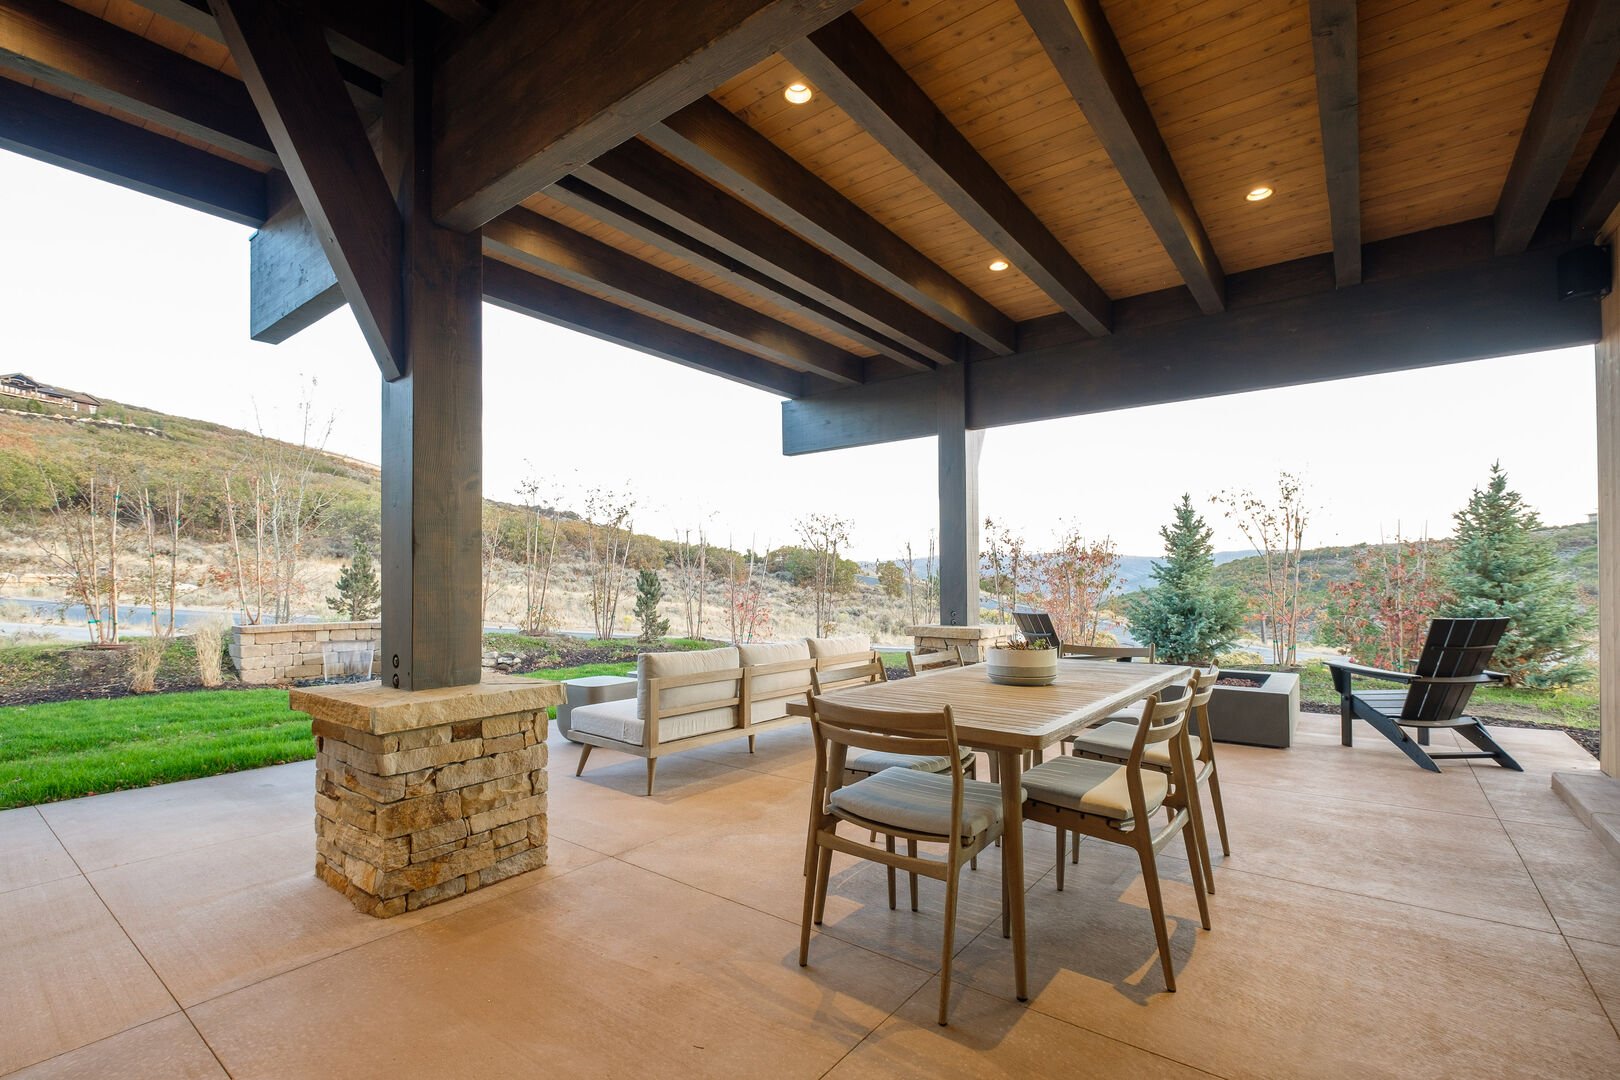 Natural gas fire and comfortable outdoor seating.